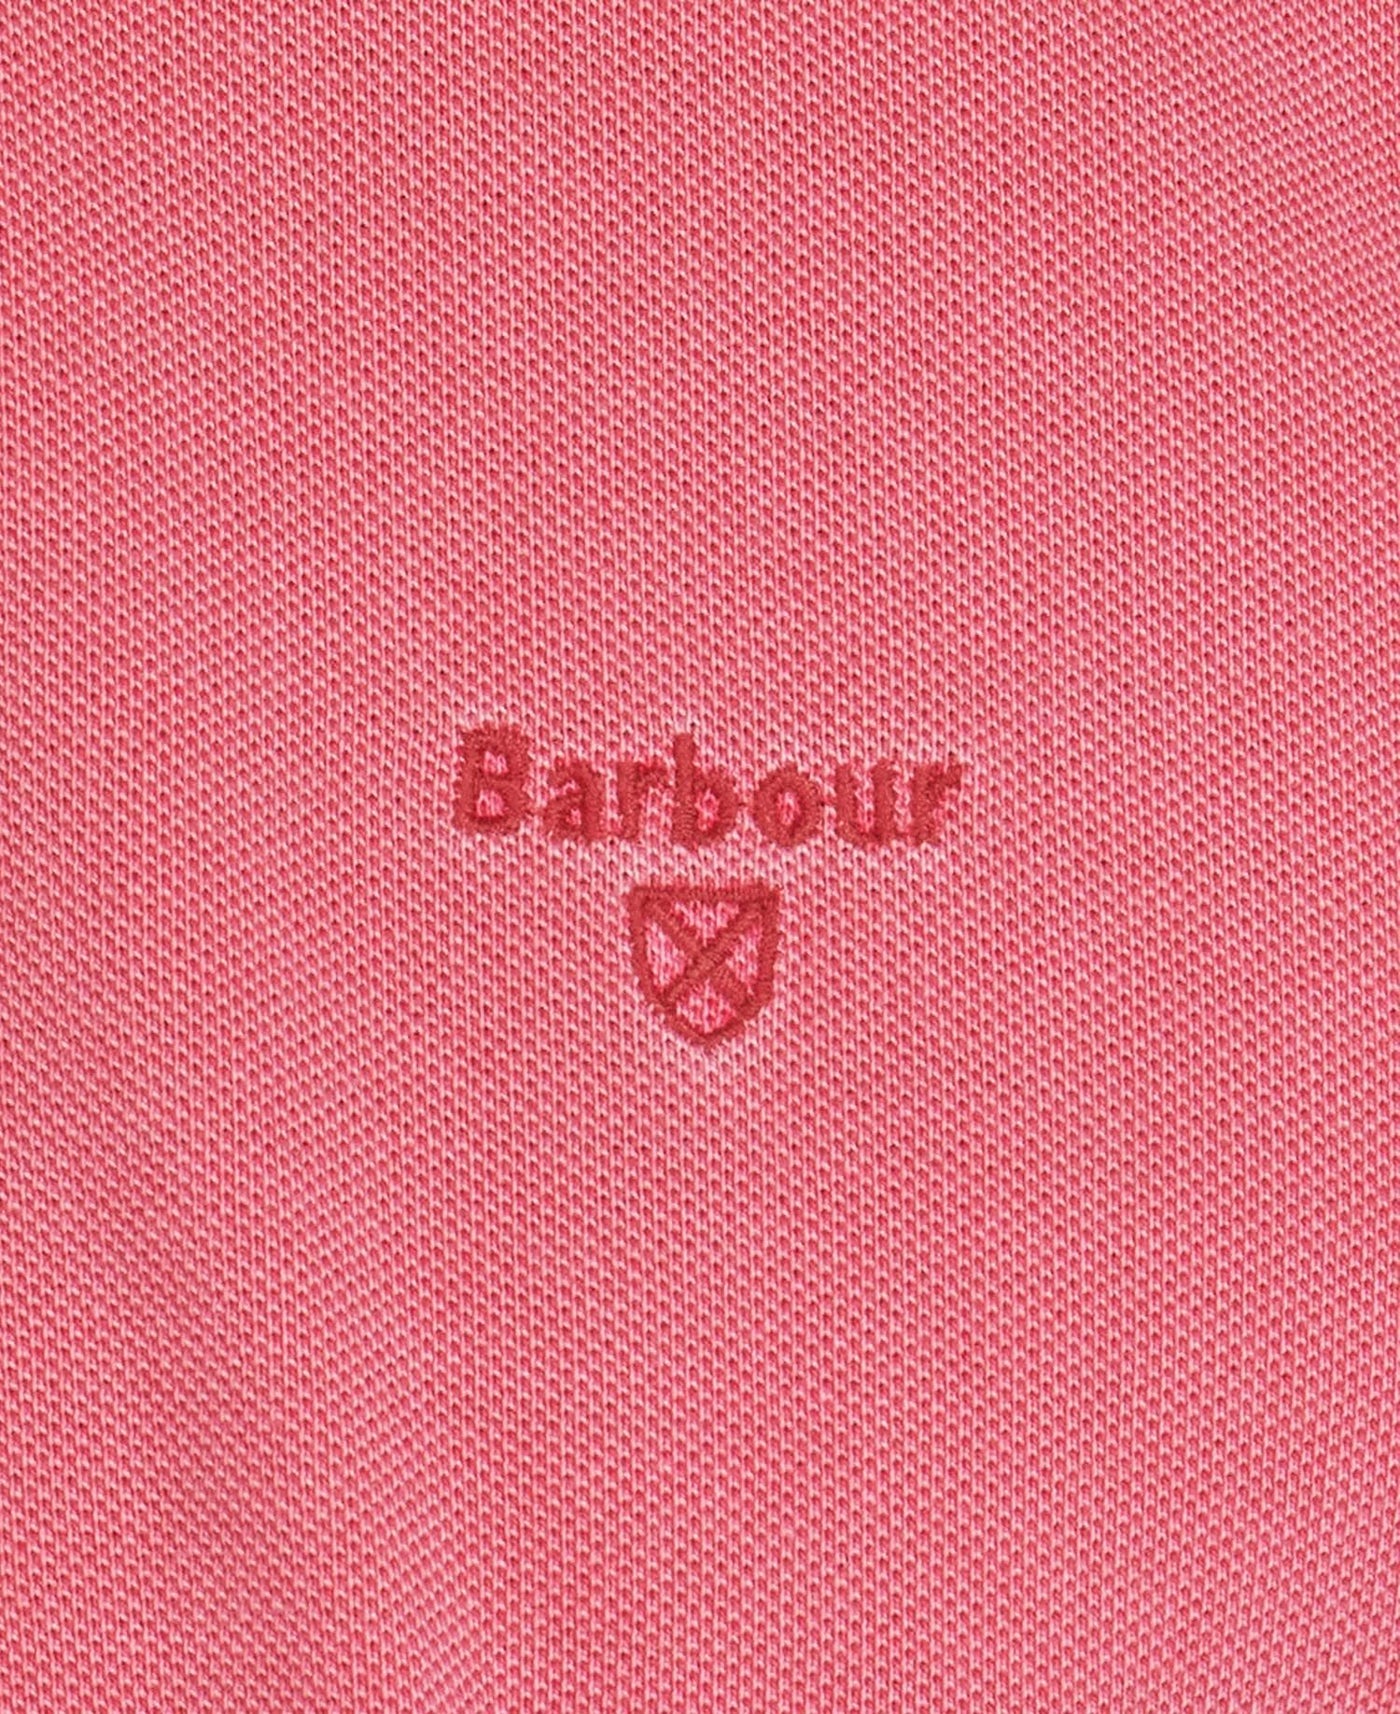 Barbour Polo Washed Sport fushia - Lothaire